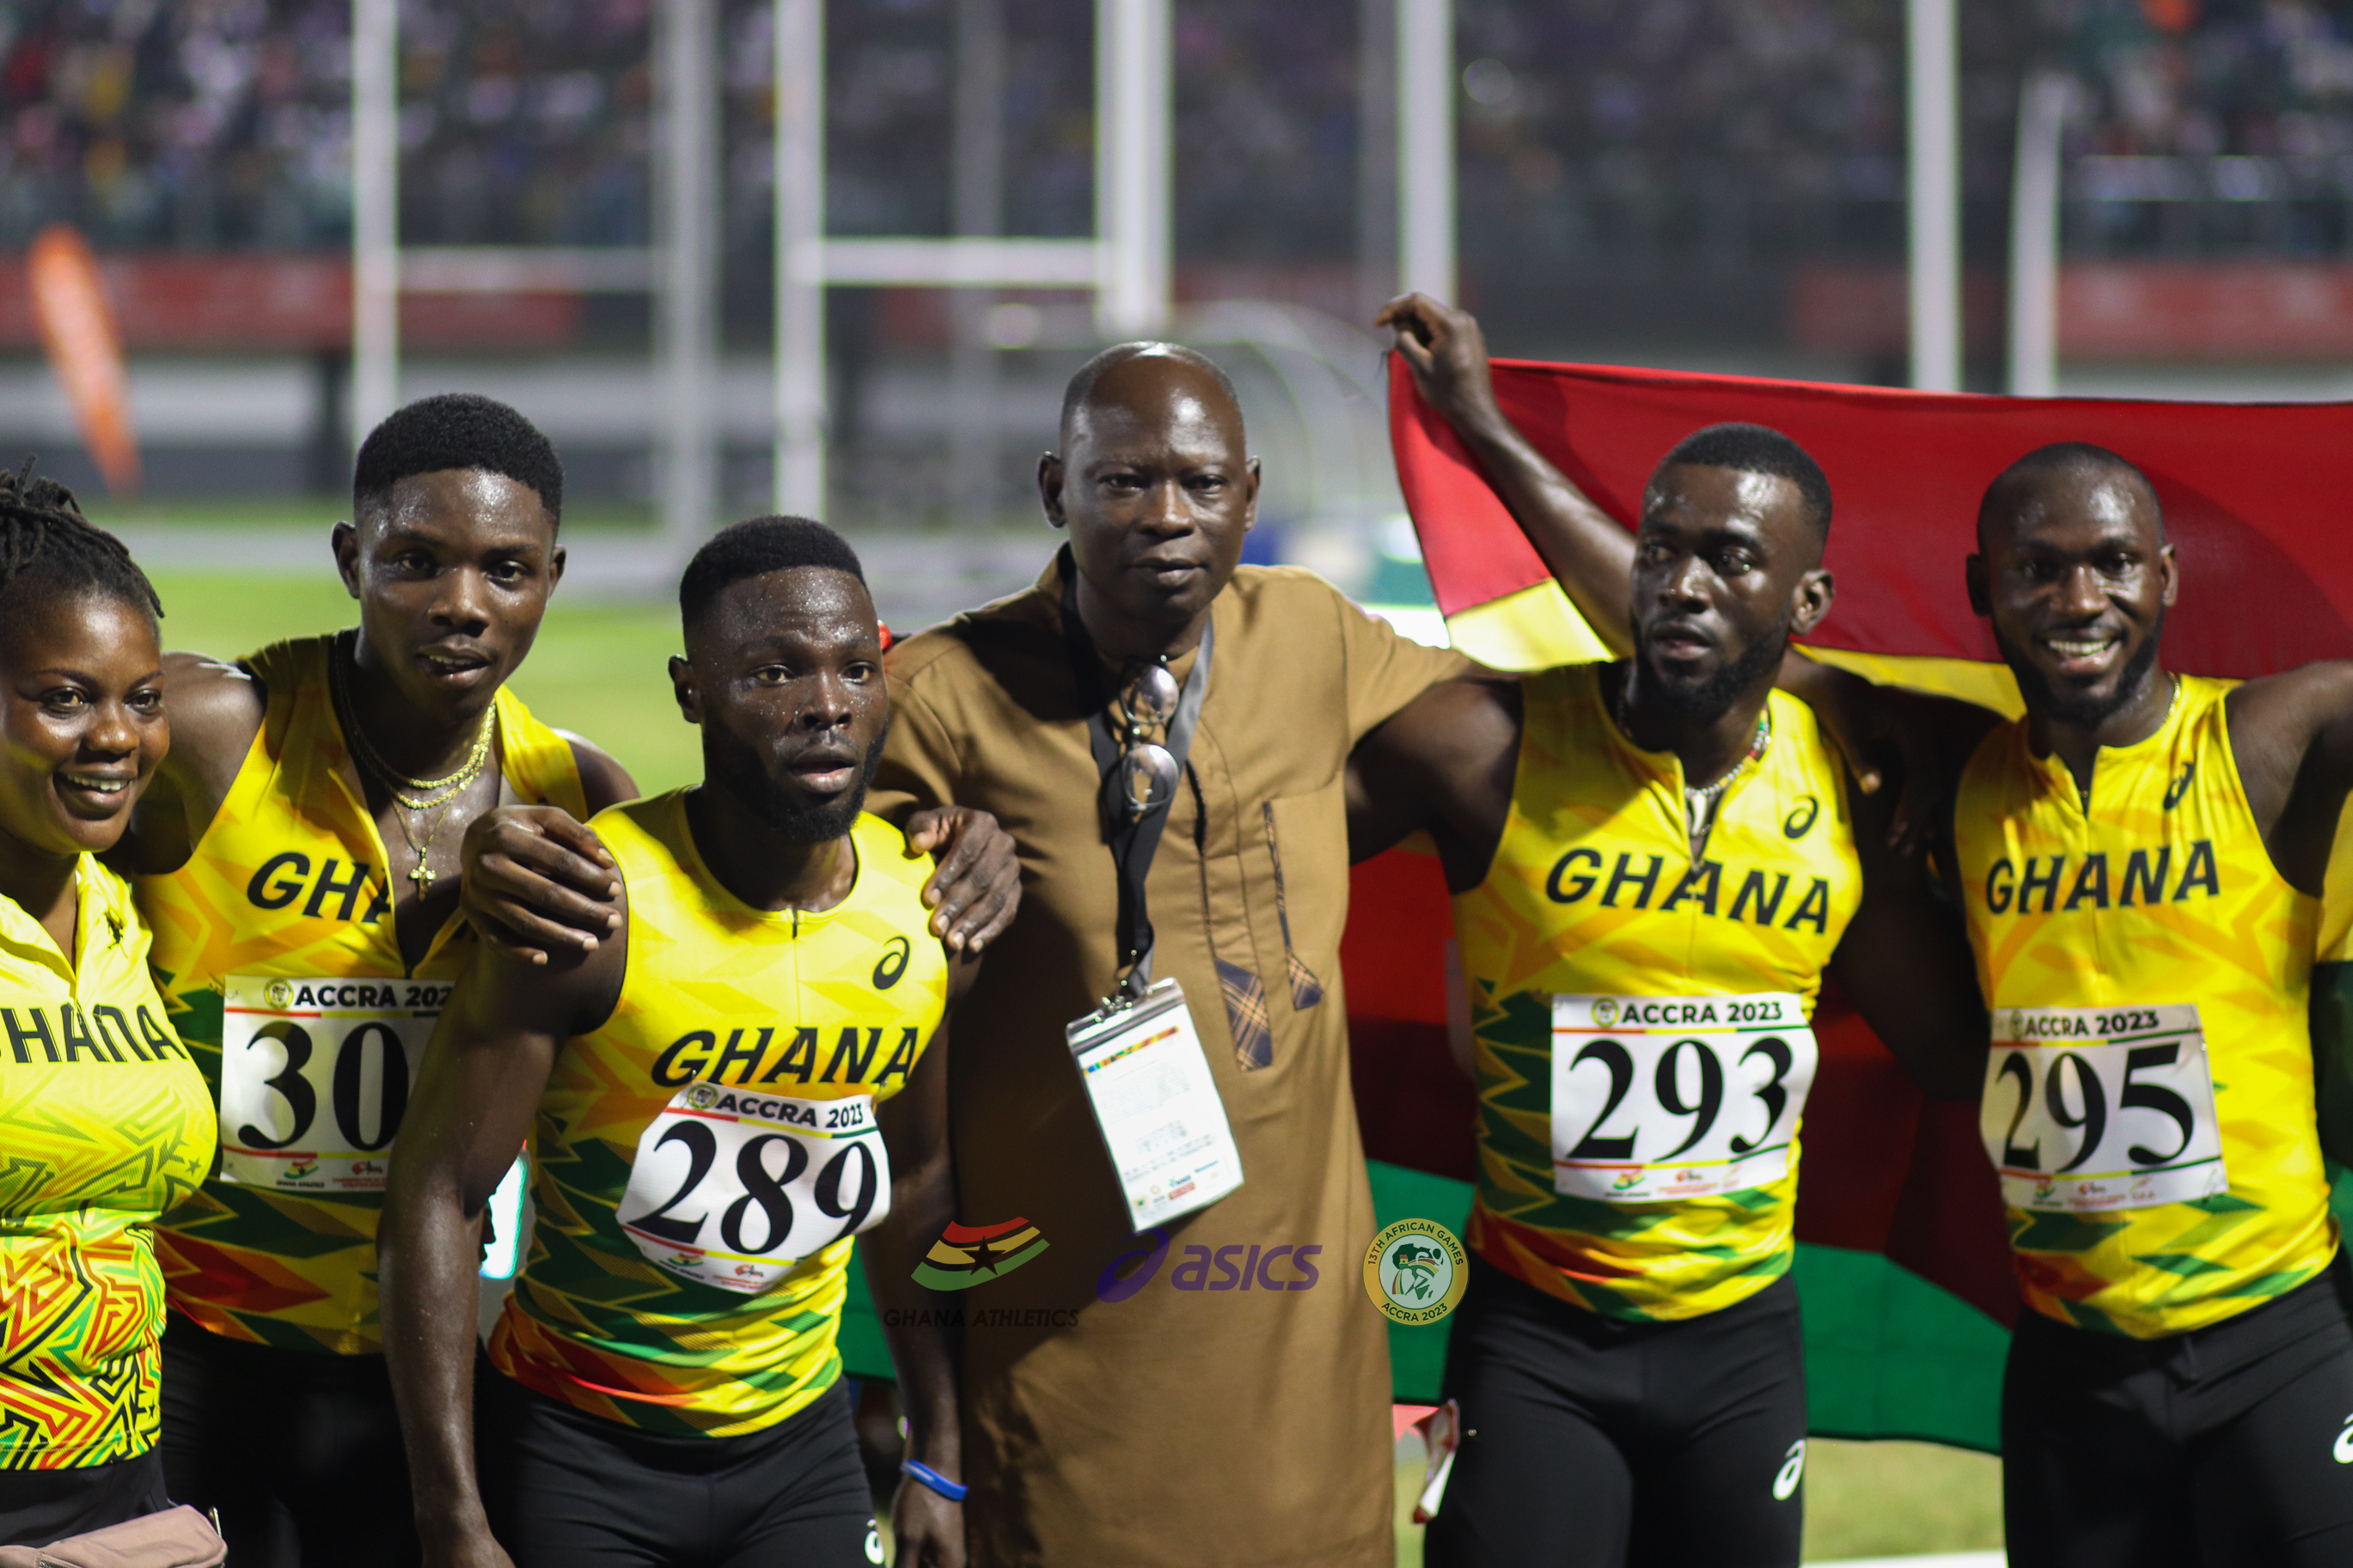  Ghana Athletics announces Team for African Athletics Championship in Cameroon